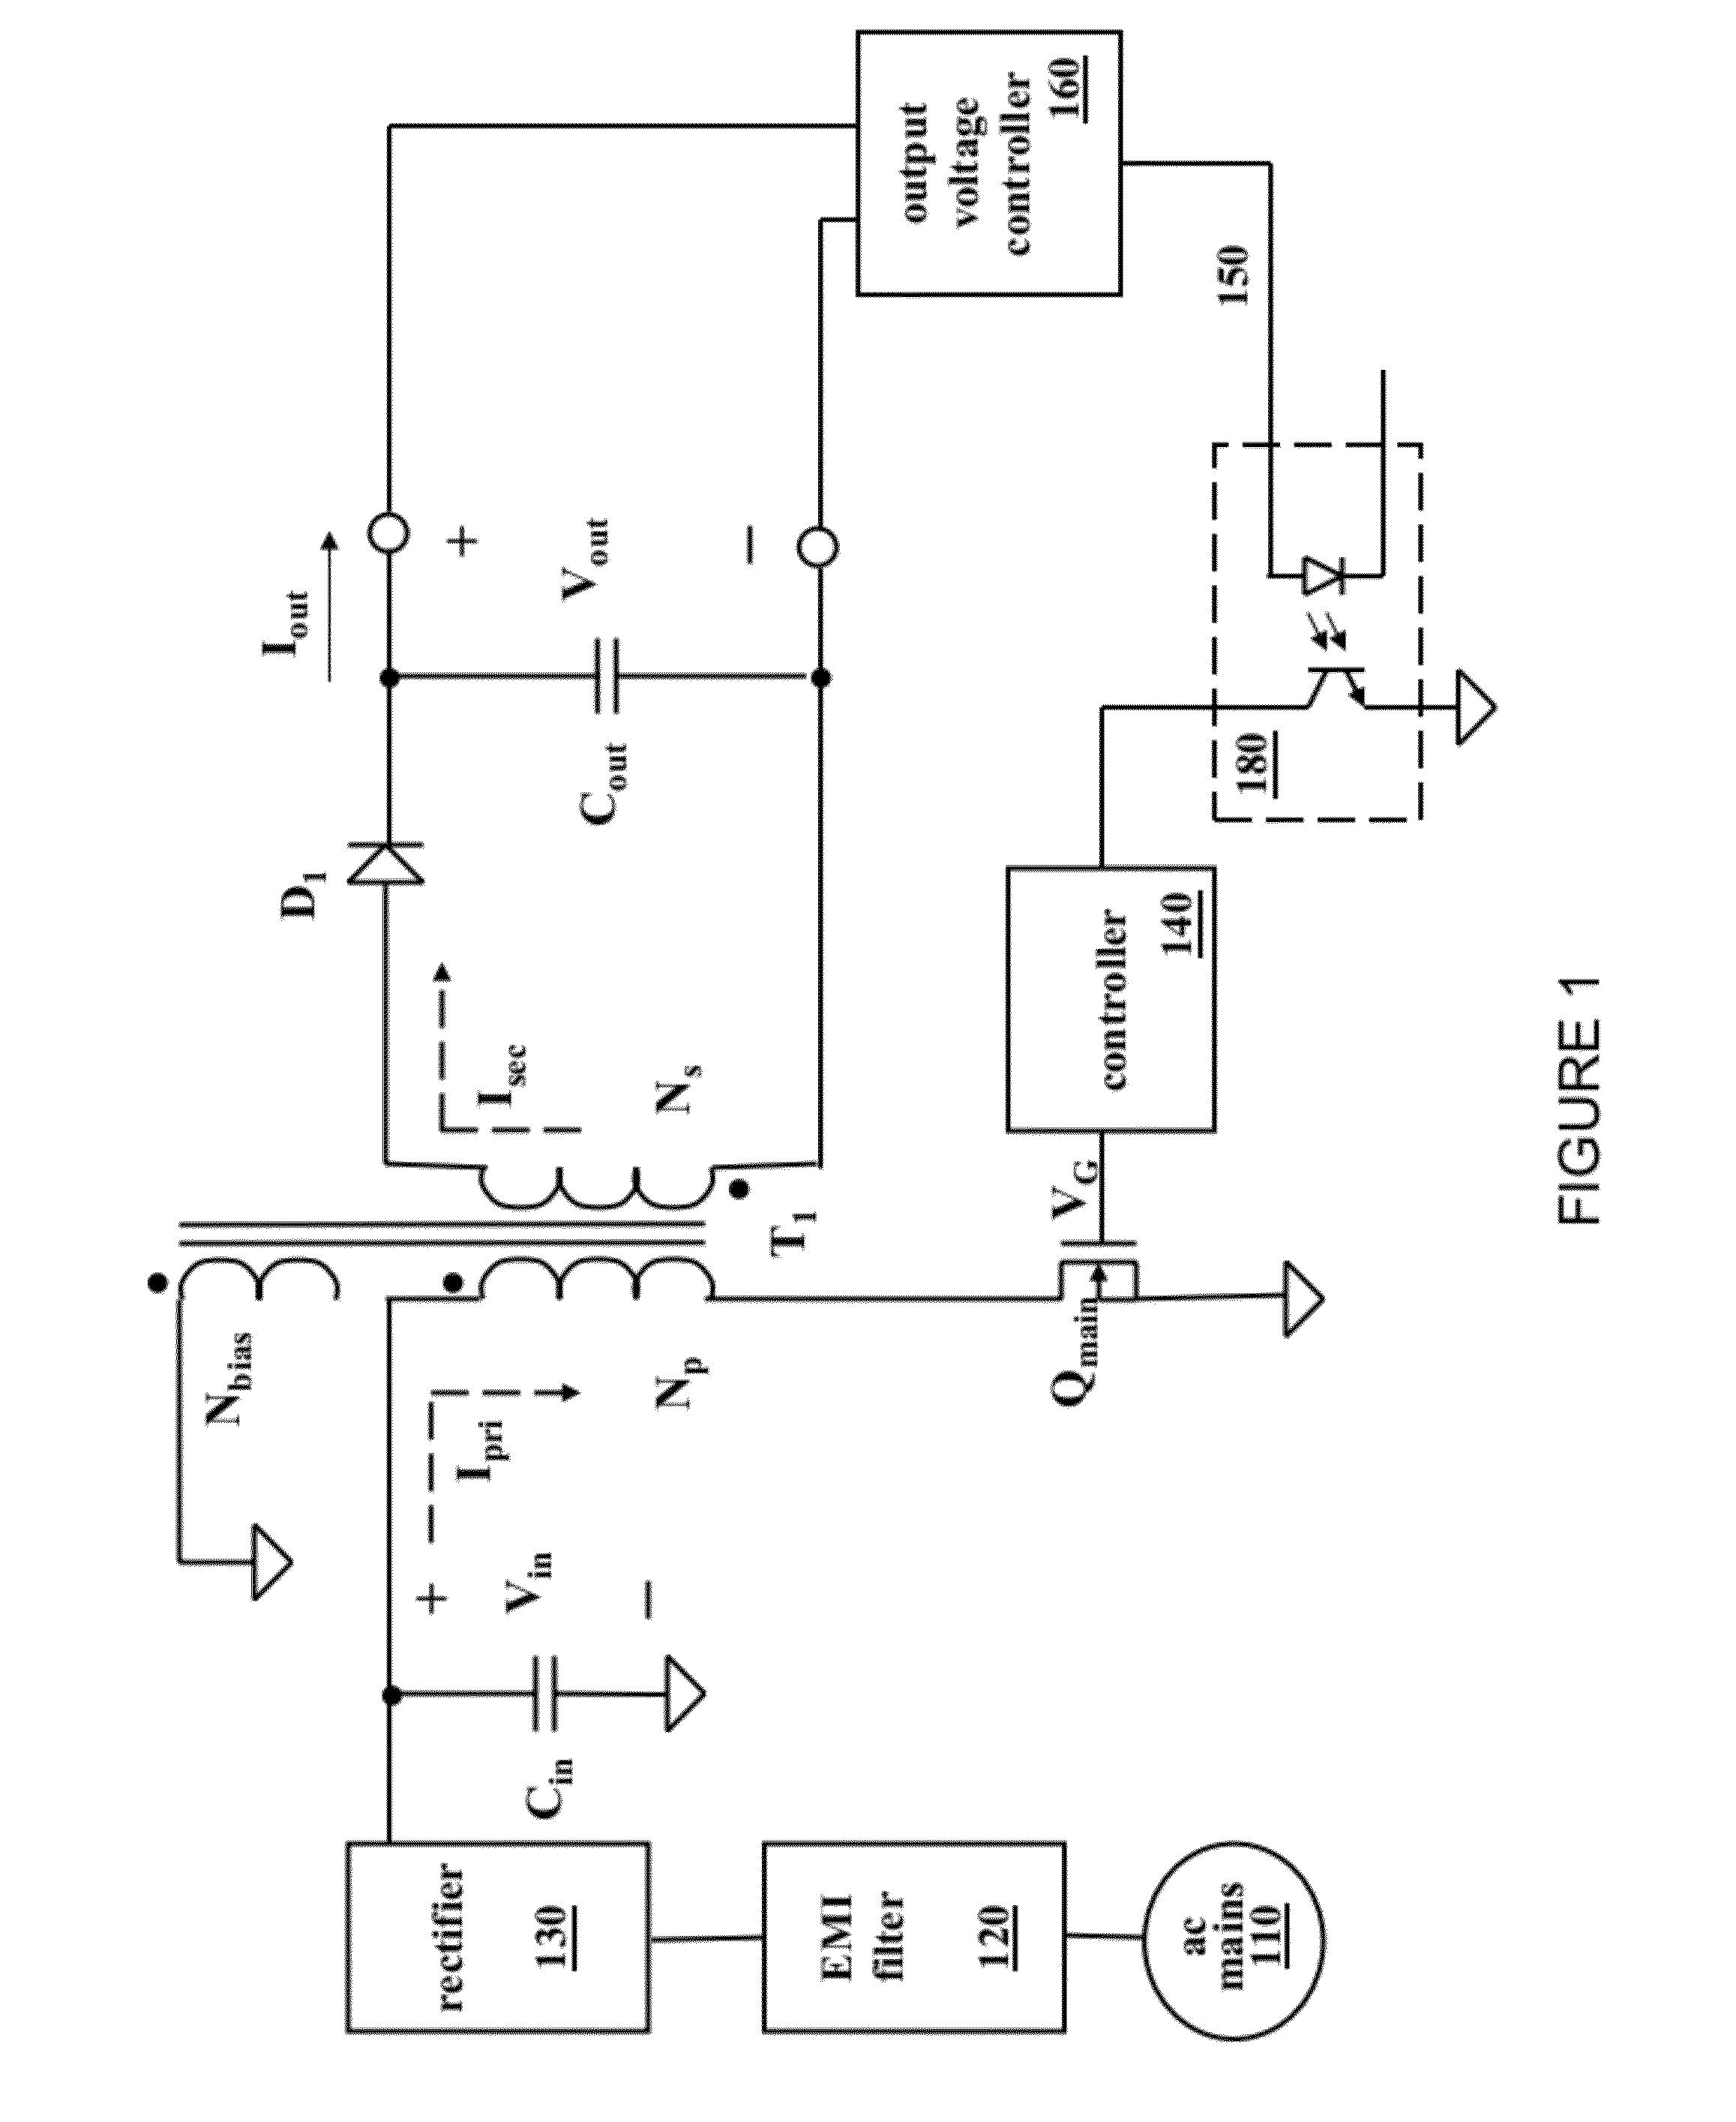 Power Converter with Reduced Power Dissipation